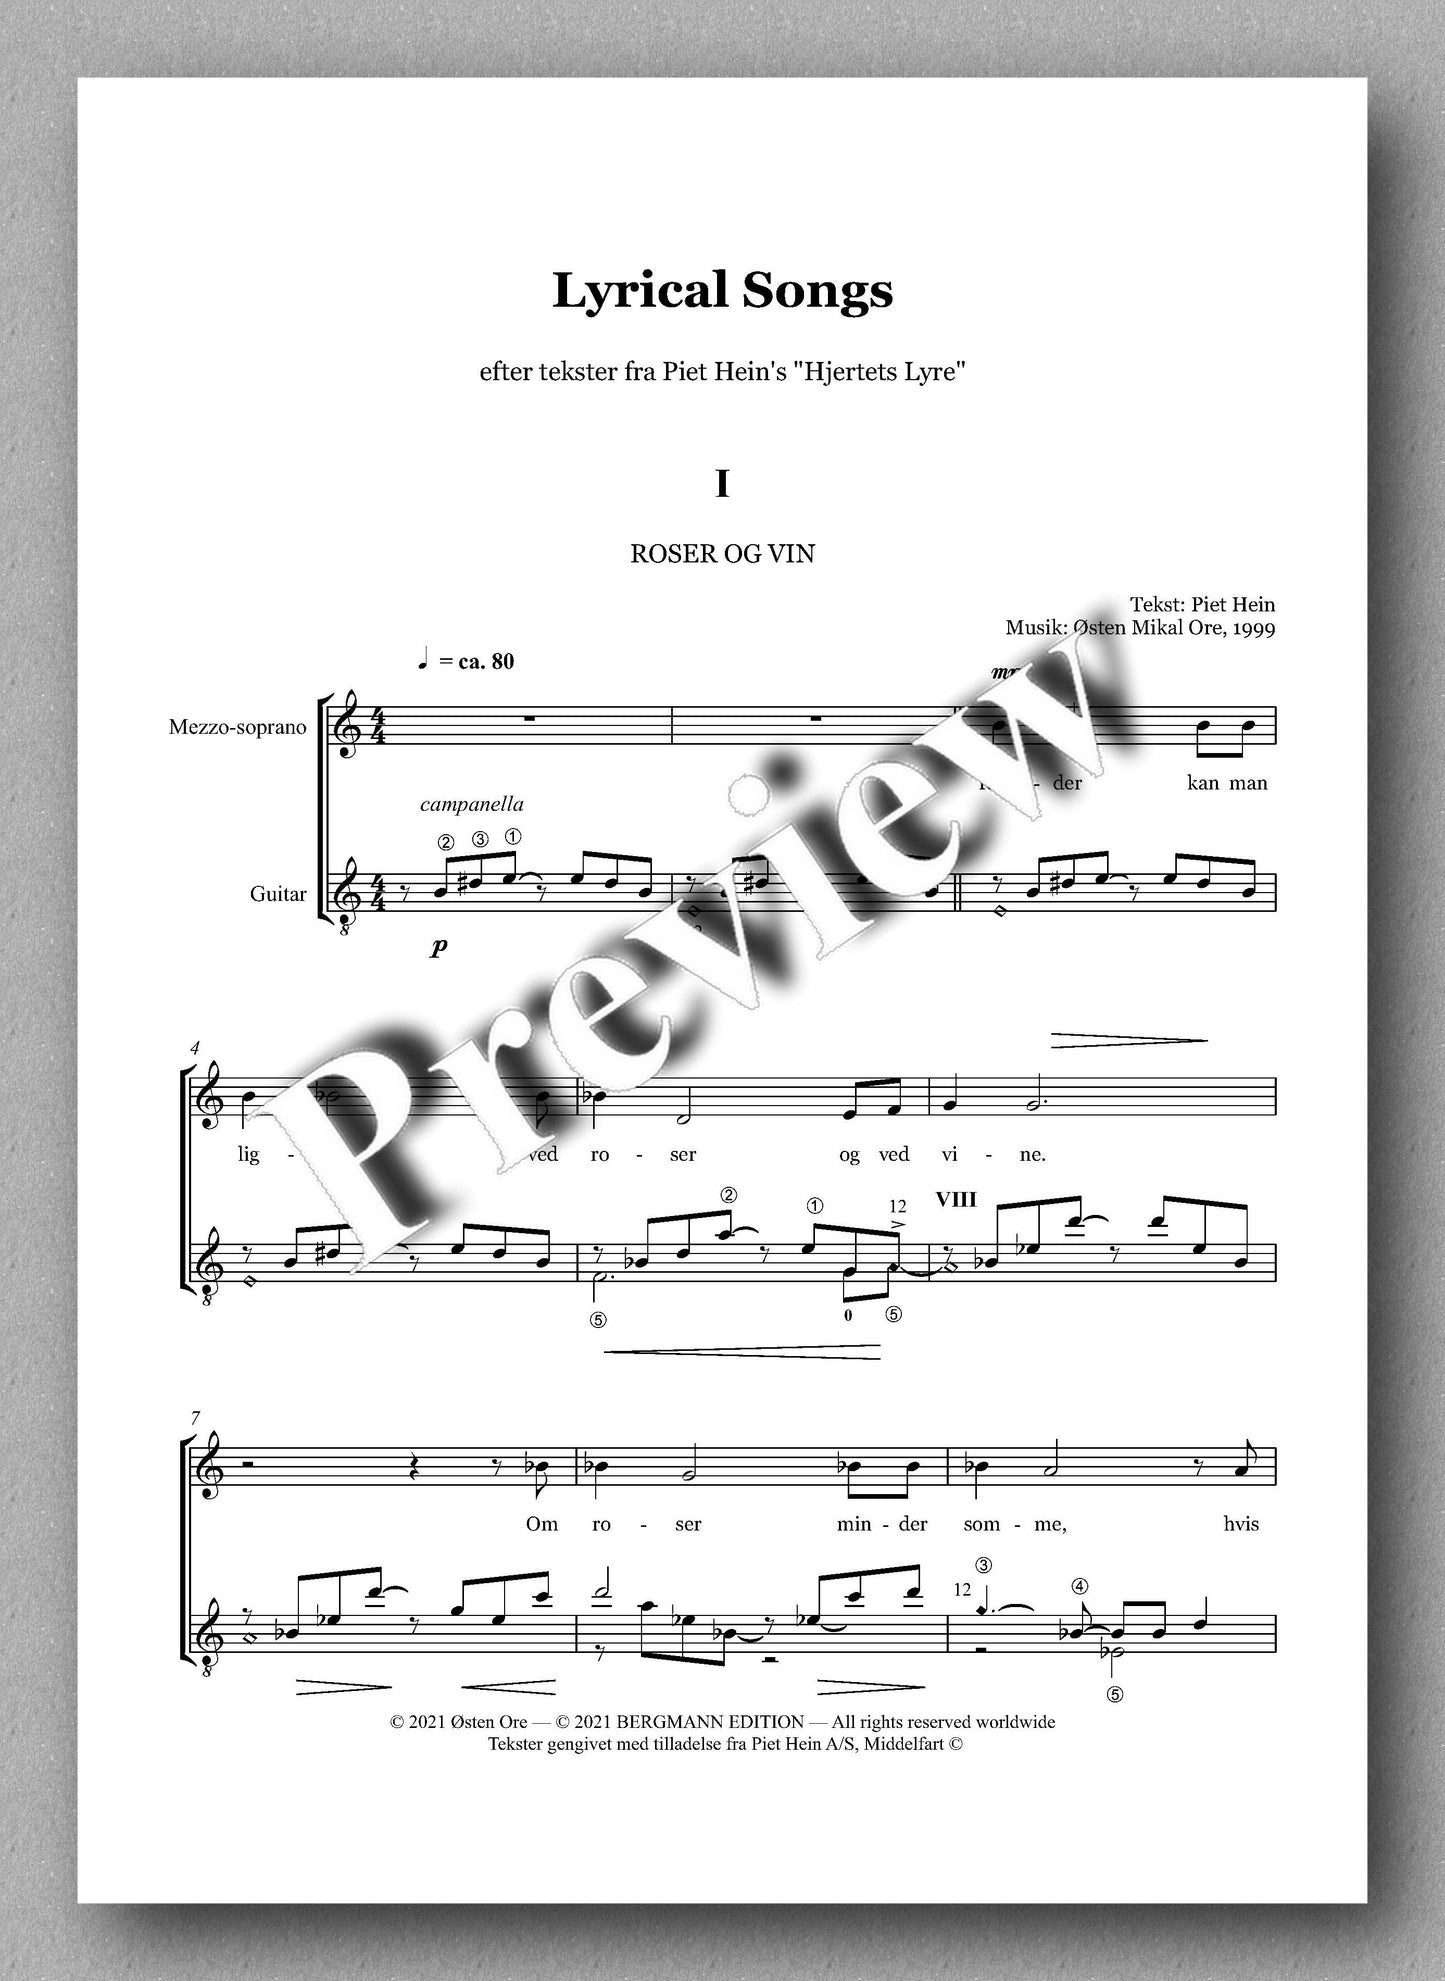 Østen Mikal Ore,  Lyrical Songs, with text by Piet Hein - music score 1